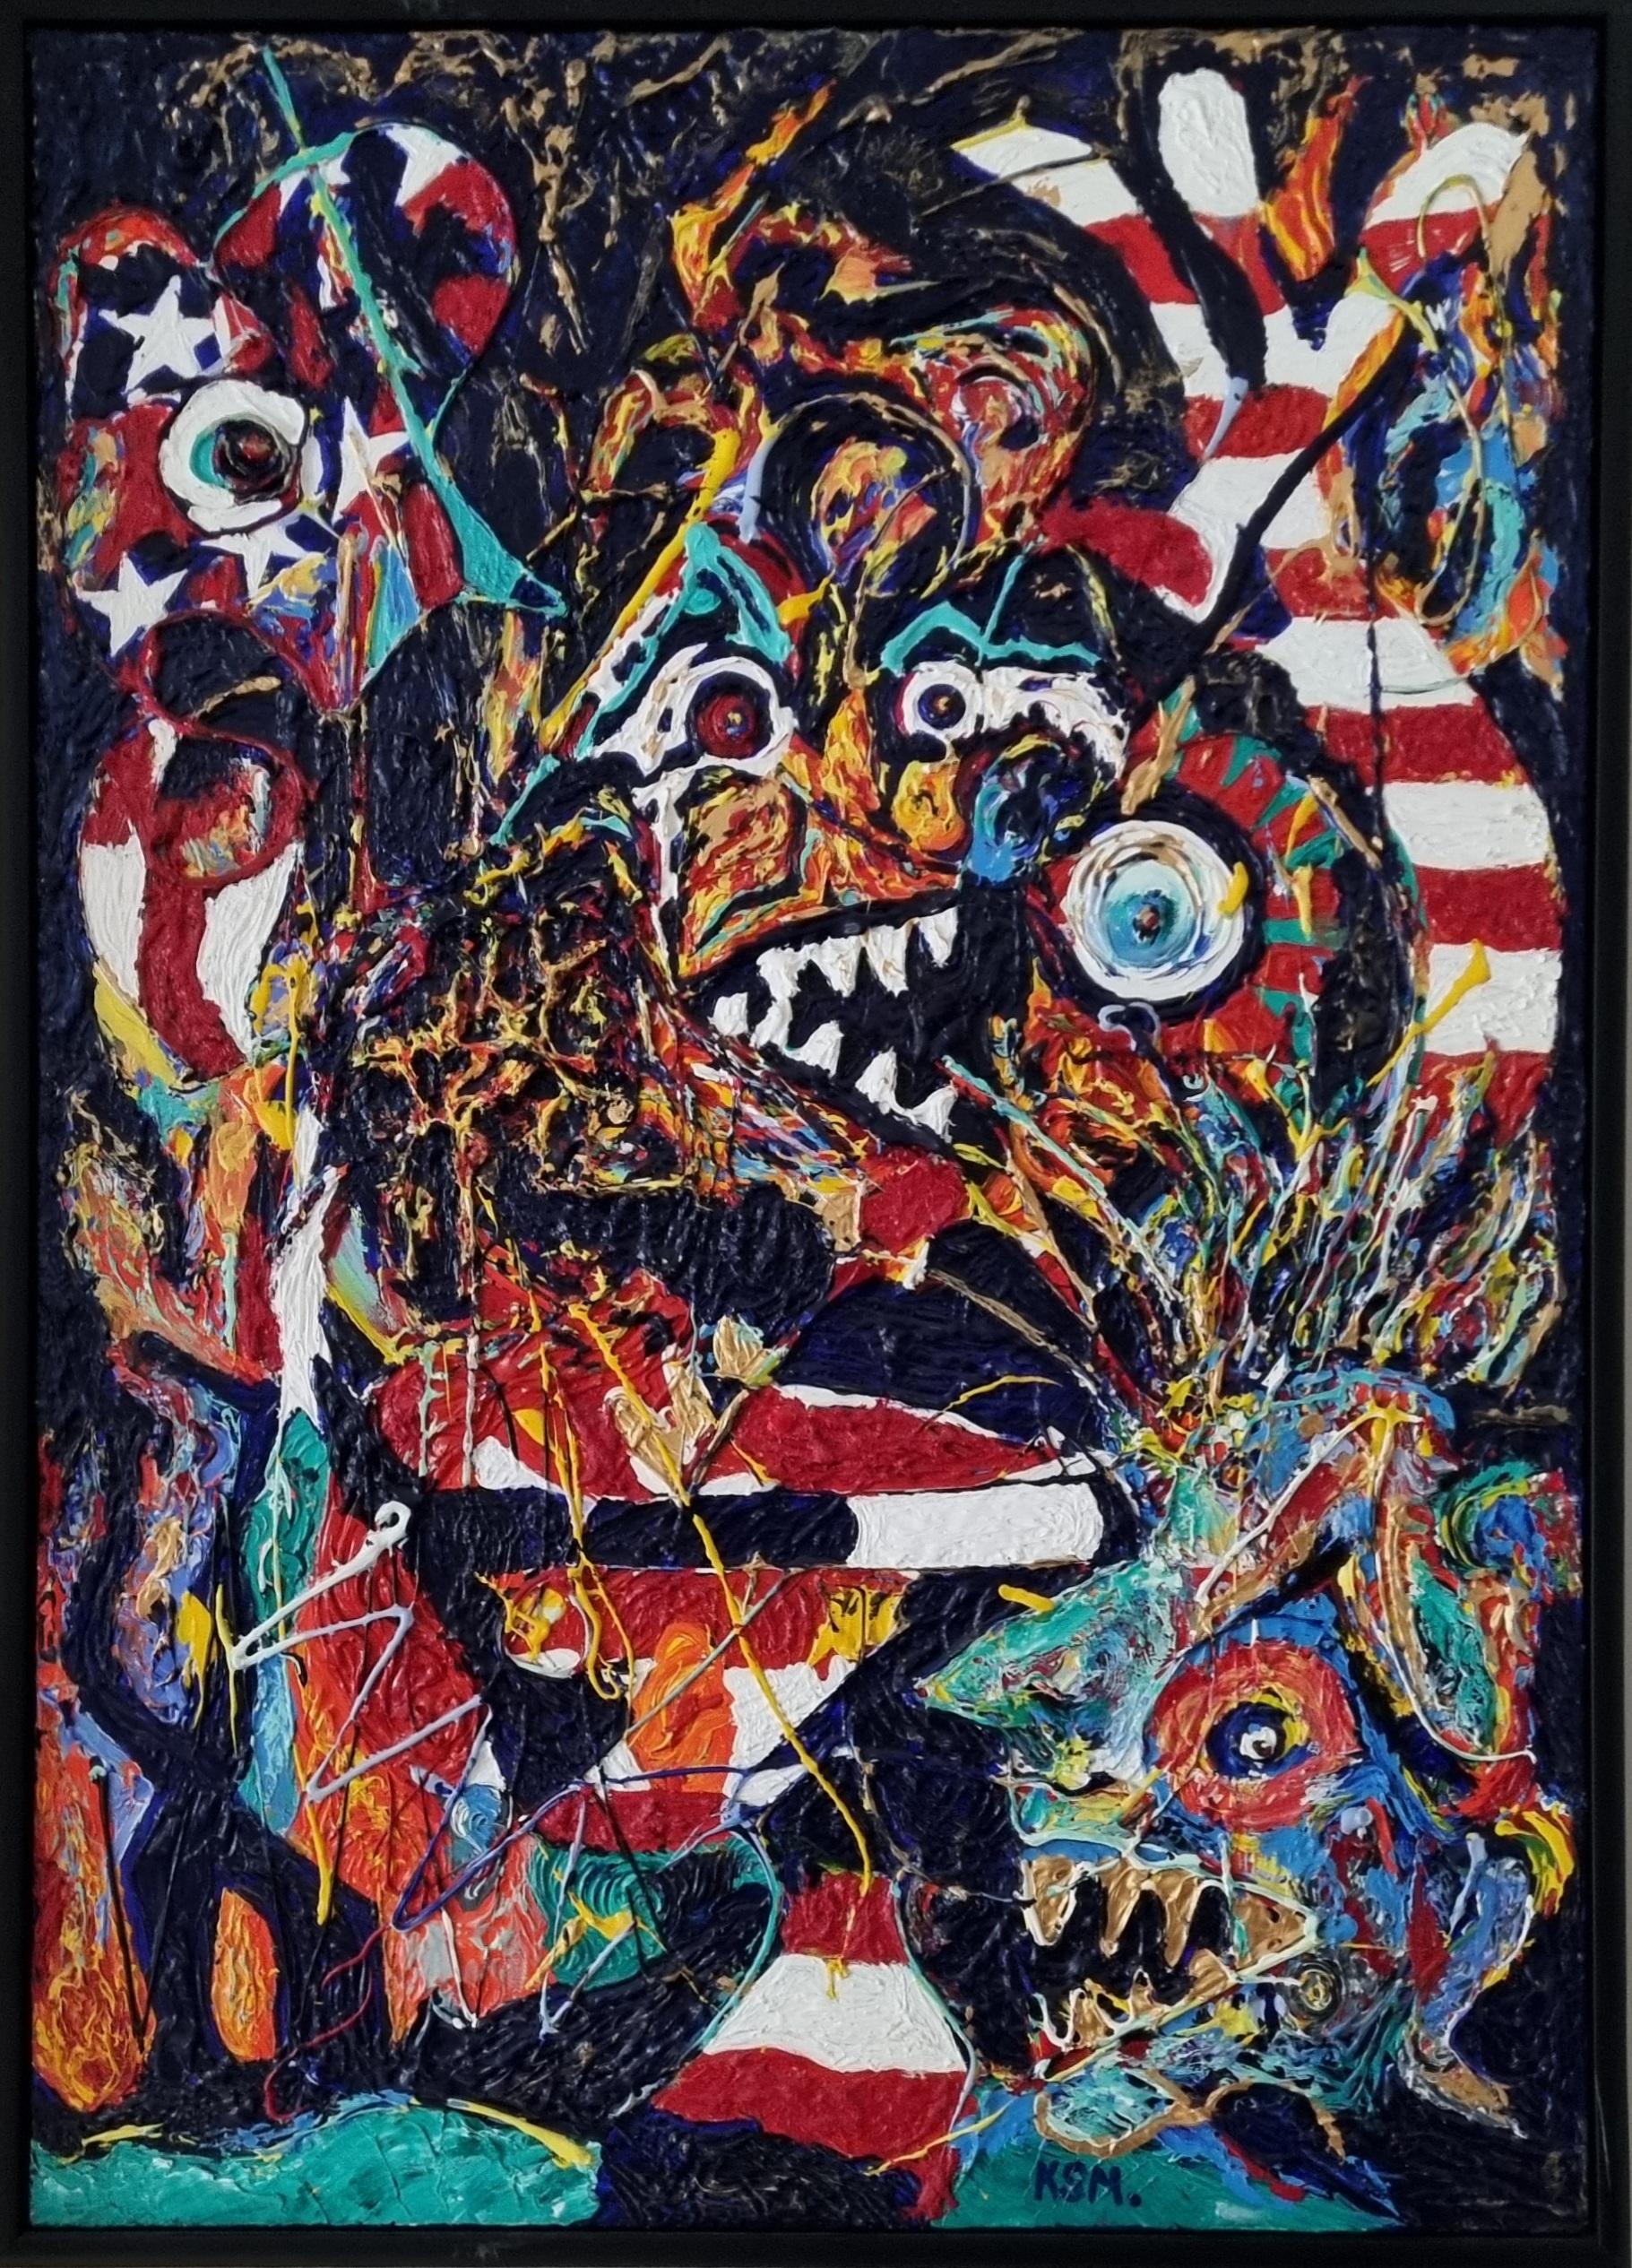 Abstract Painting , Shadows in the Flag , acrylic on canvas

Contorted figures set against the back drop of a burning Stars and Stripes . Representing Lies & corruption within government that is laid bare in this frenzied painting .



Sold with a